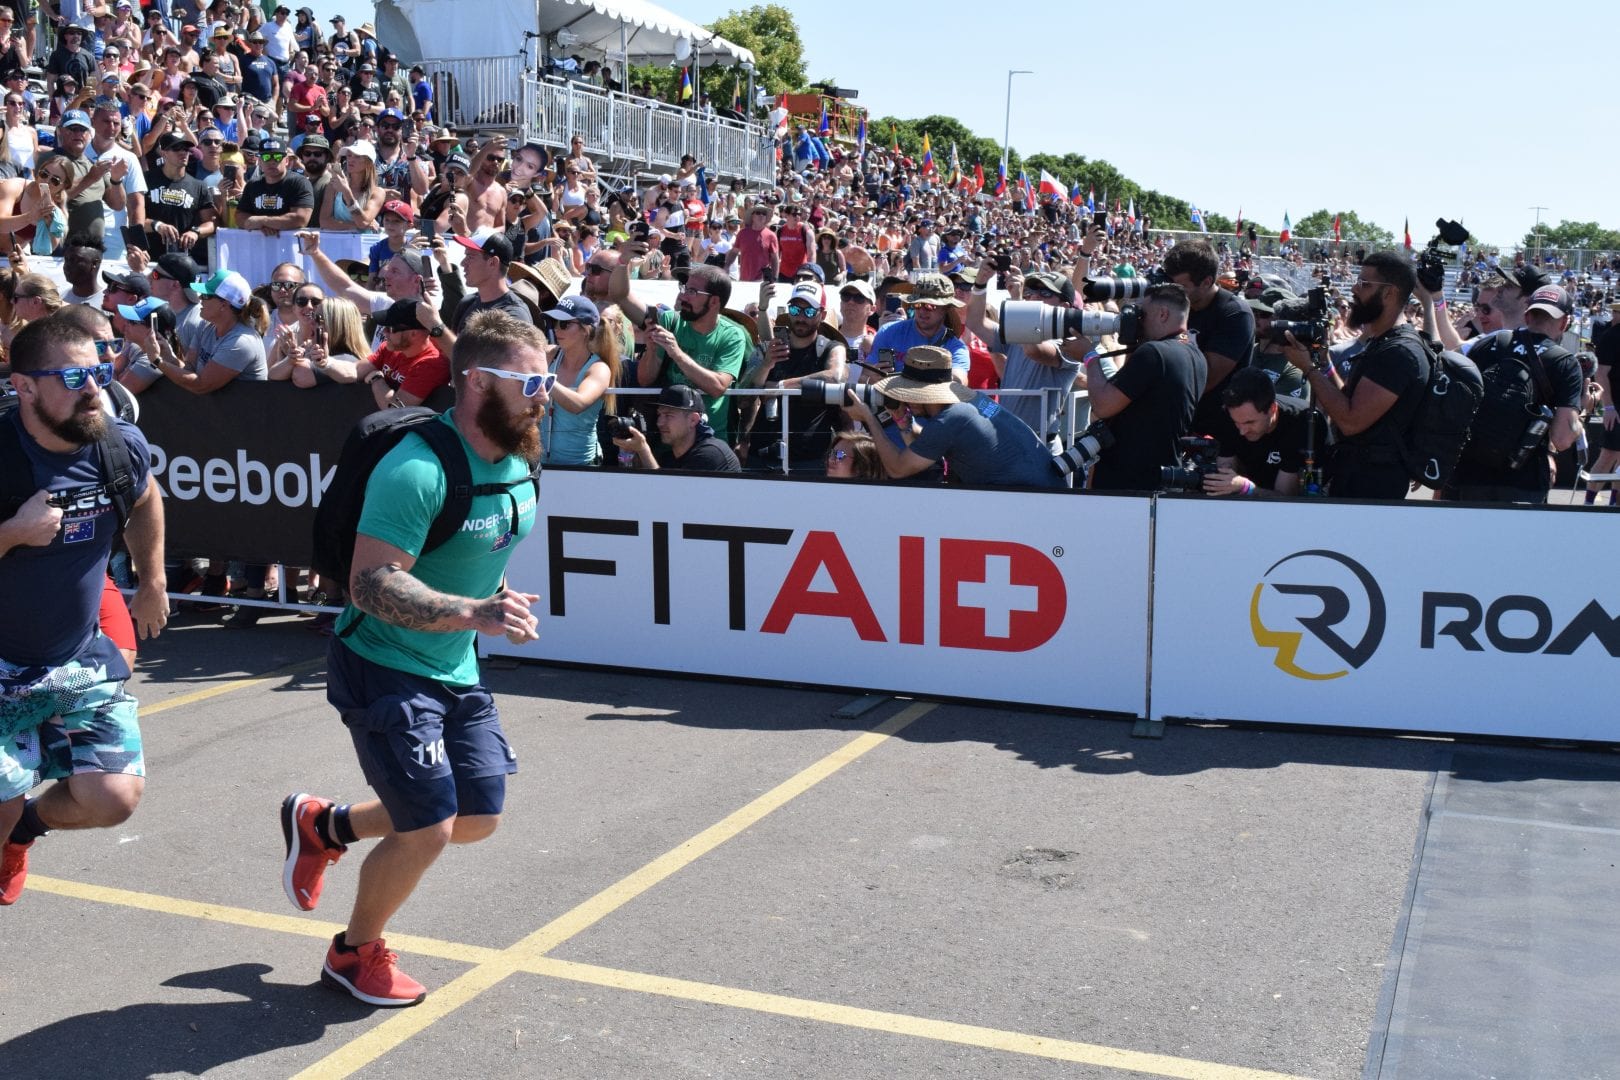 Dean Linder-Leighton completes the Ruck Run event at the 2019 CrossFit Games